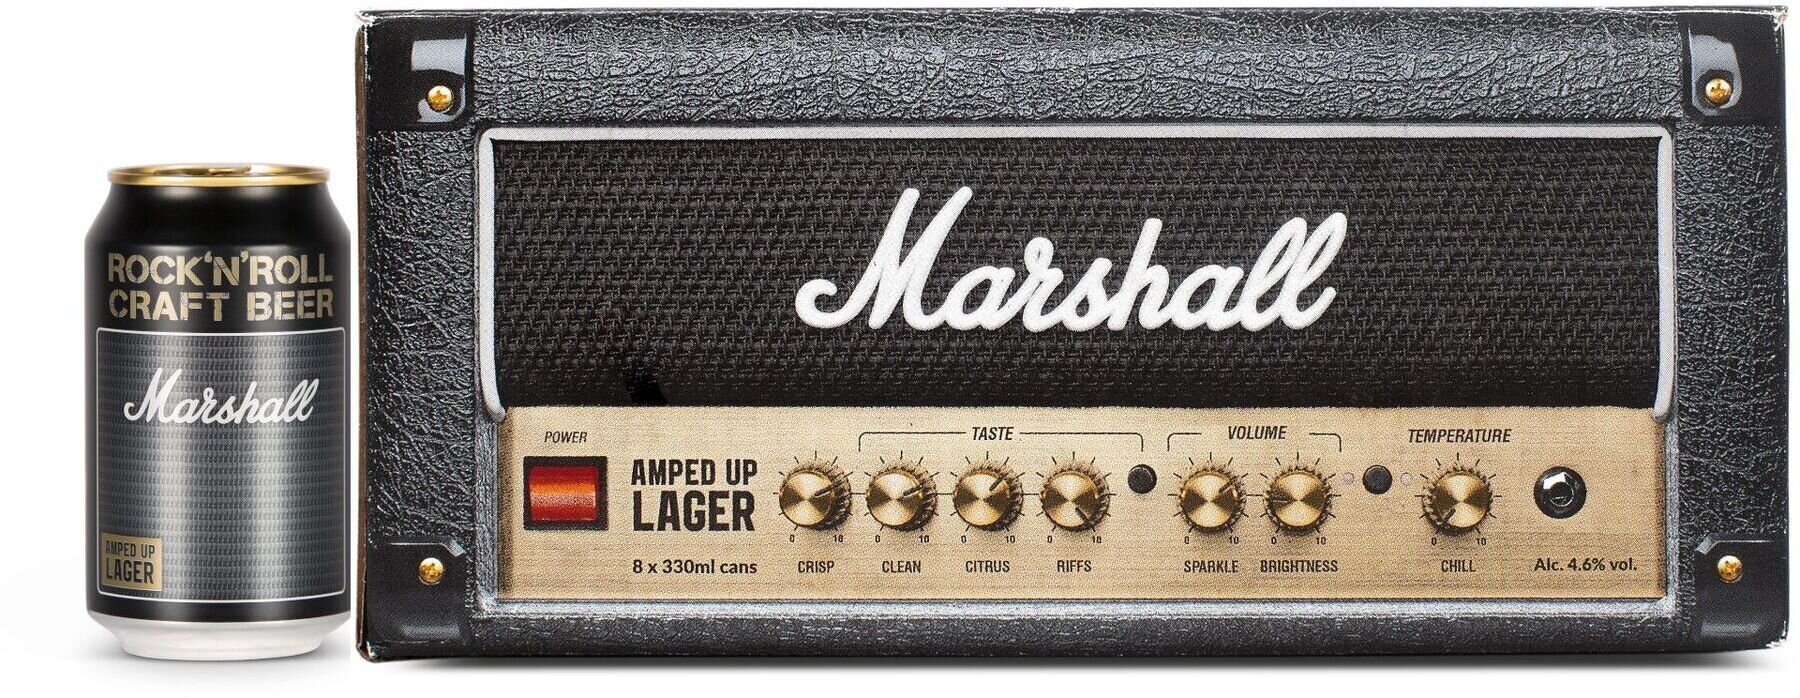 Bier Marshall Amped Up Lager Dose Bier